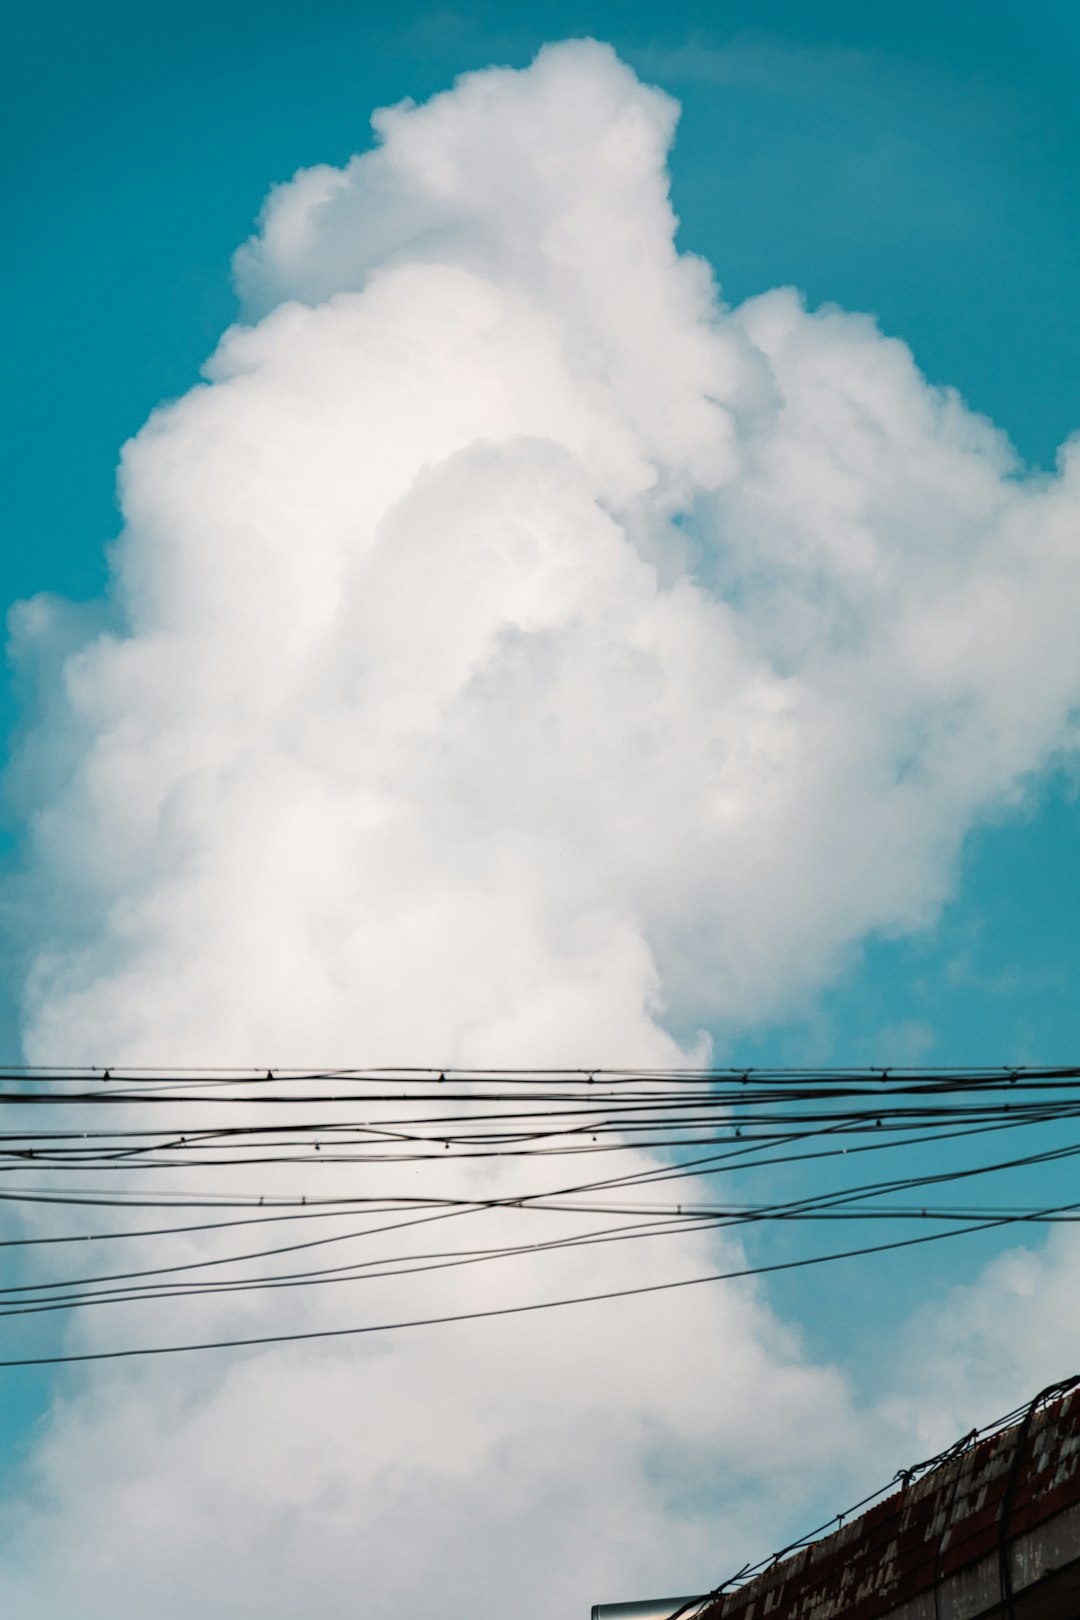 black electric wires under white clouds and blue sky during daytime